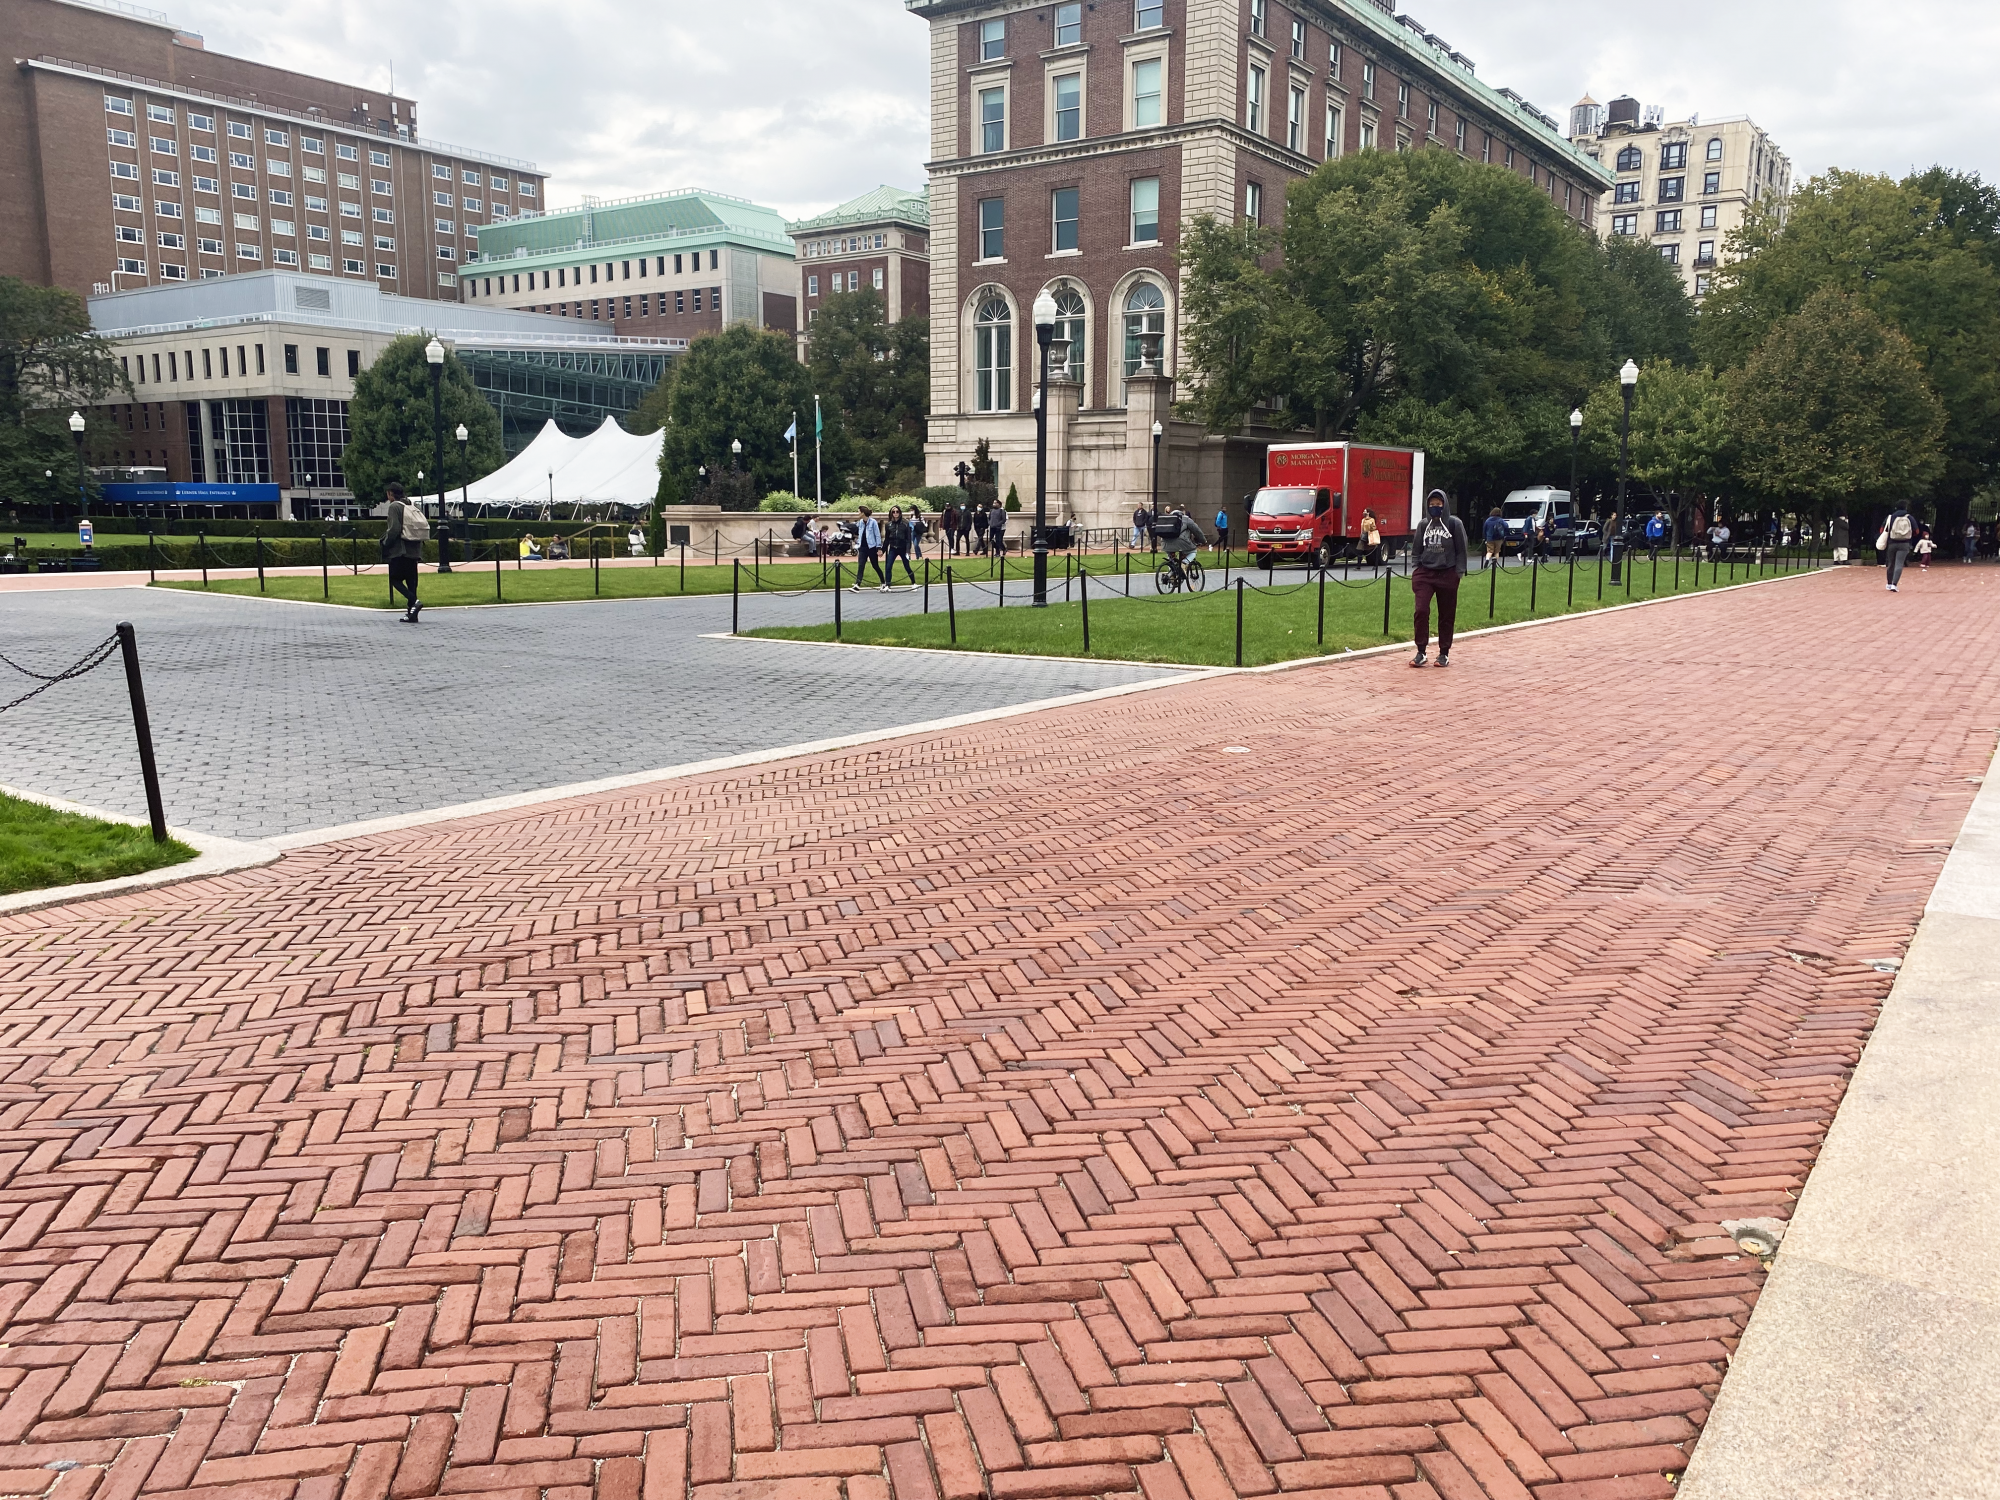 A red brick pathway with green lawns offsetting a gray cobblestone center. Trees and buildings in the background and people walking in the foreground.